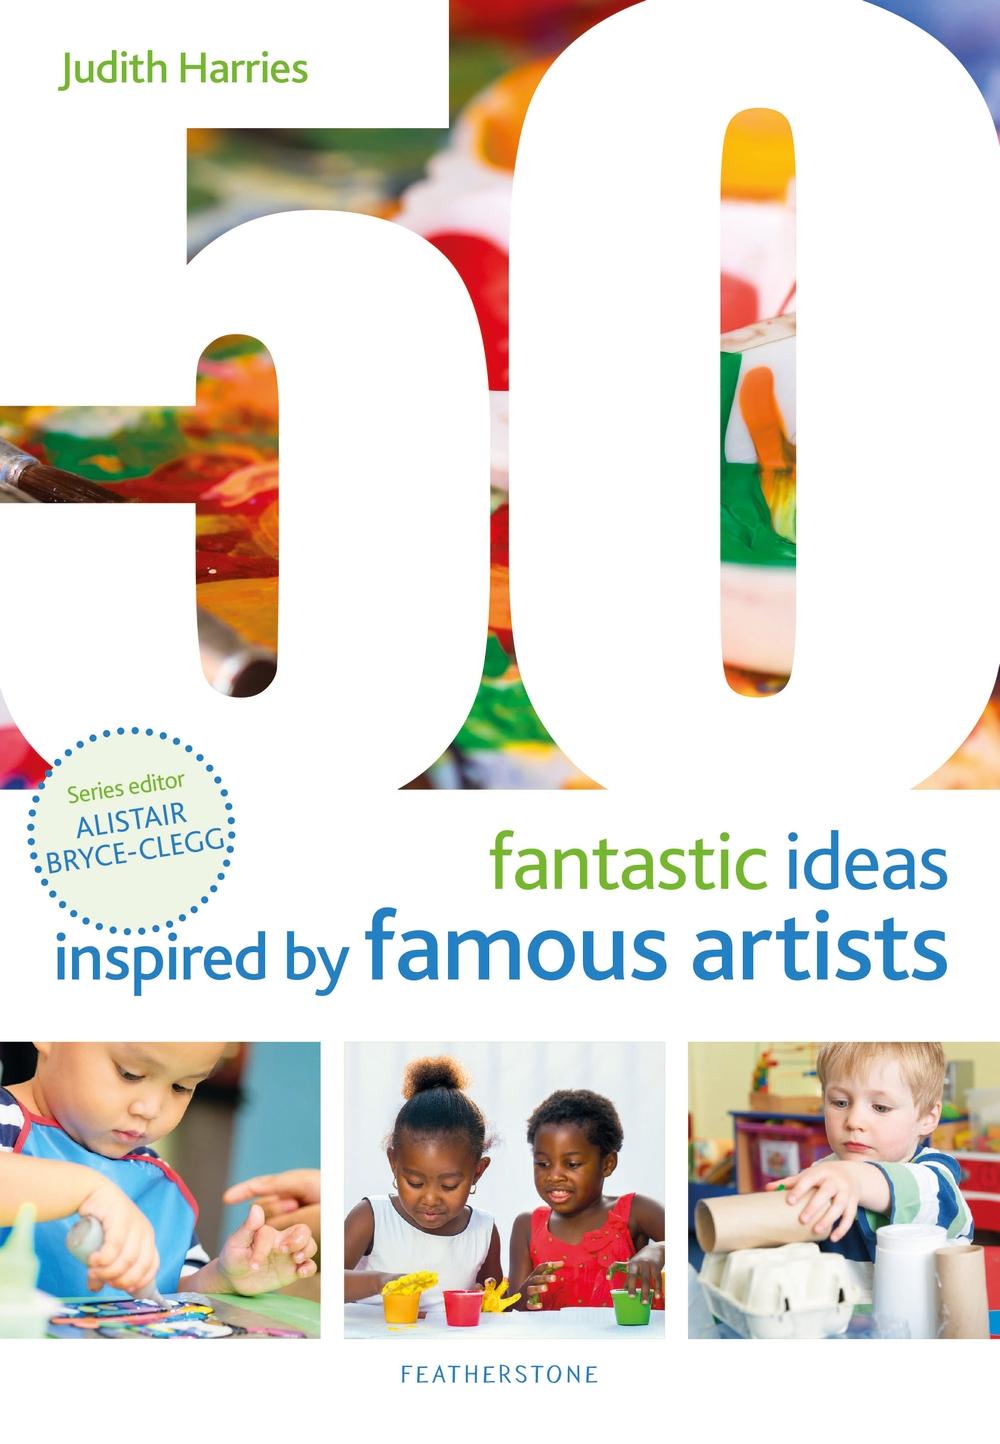 50 Fantastic Ideas Inspired by Famous Artists - Judith Harries